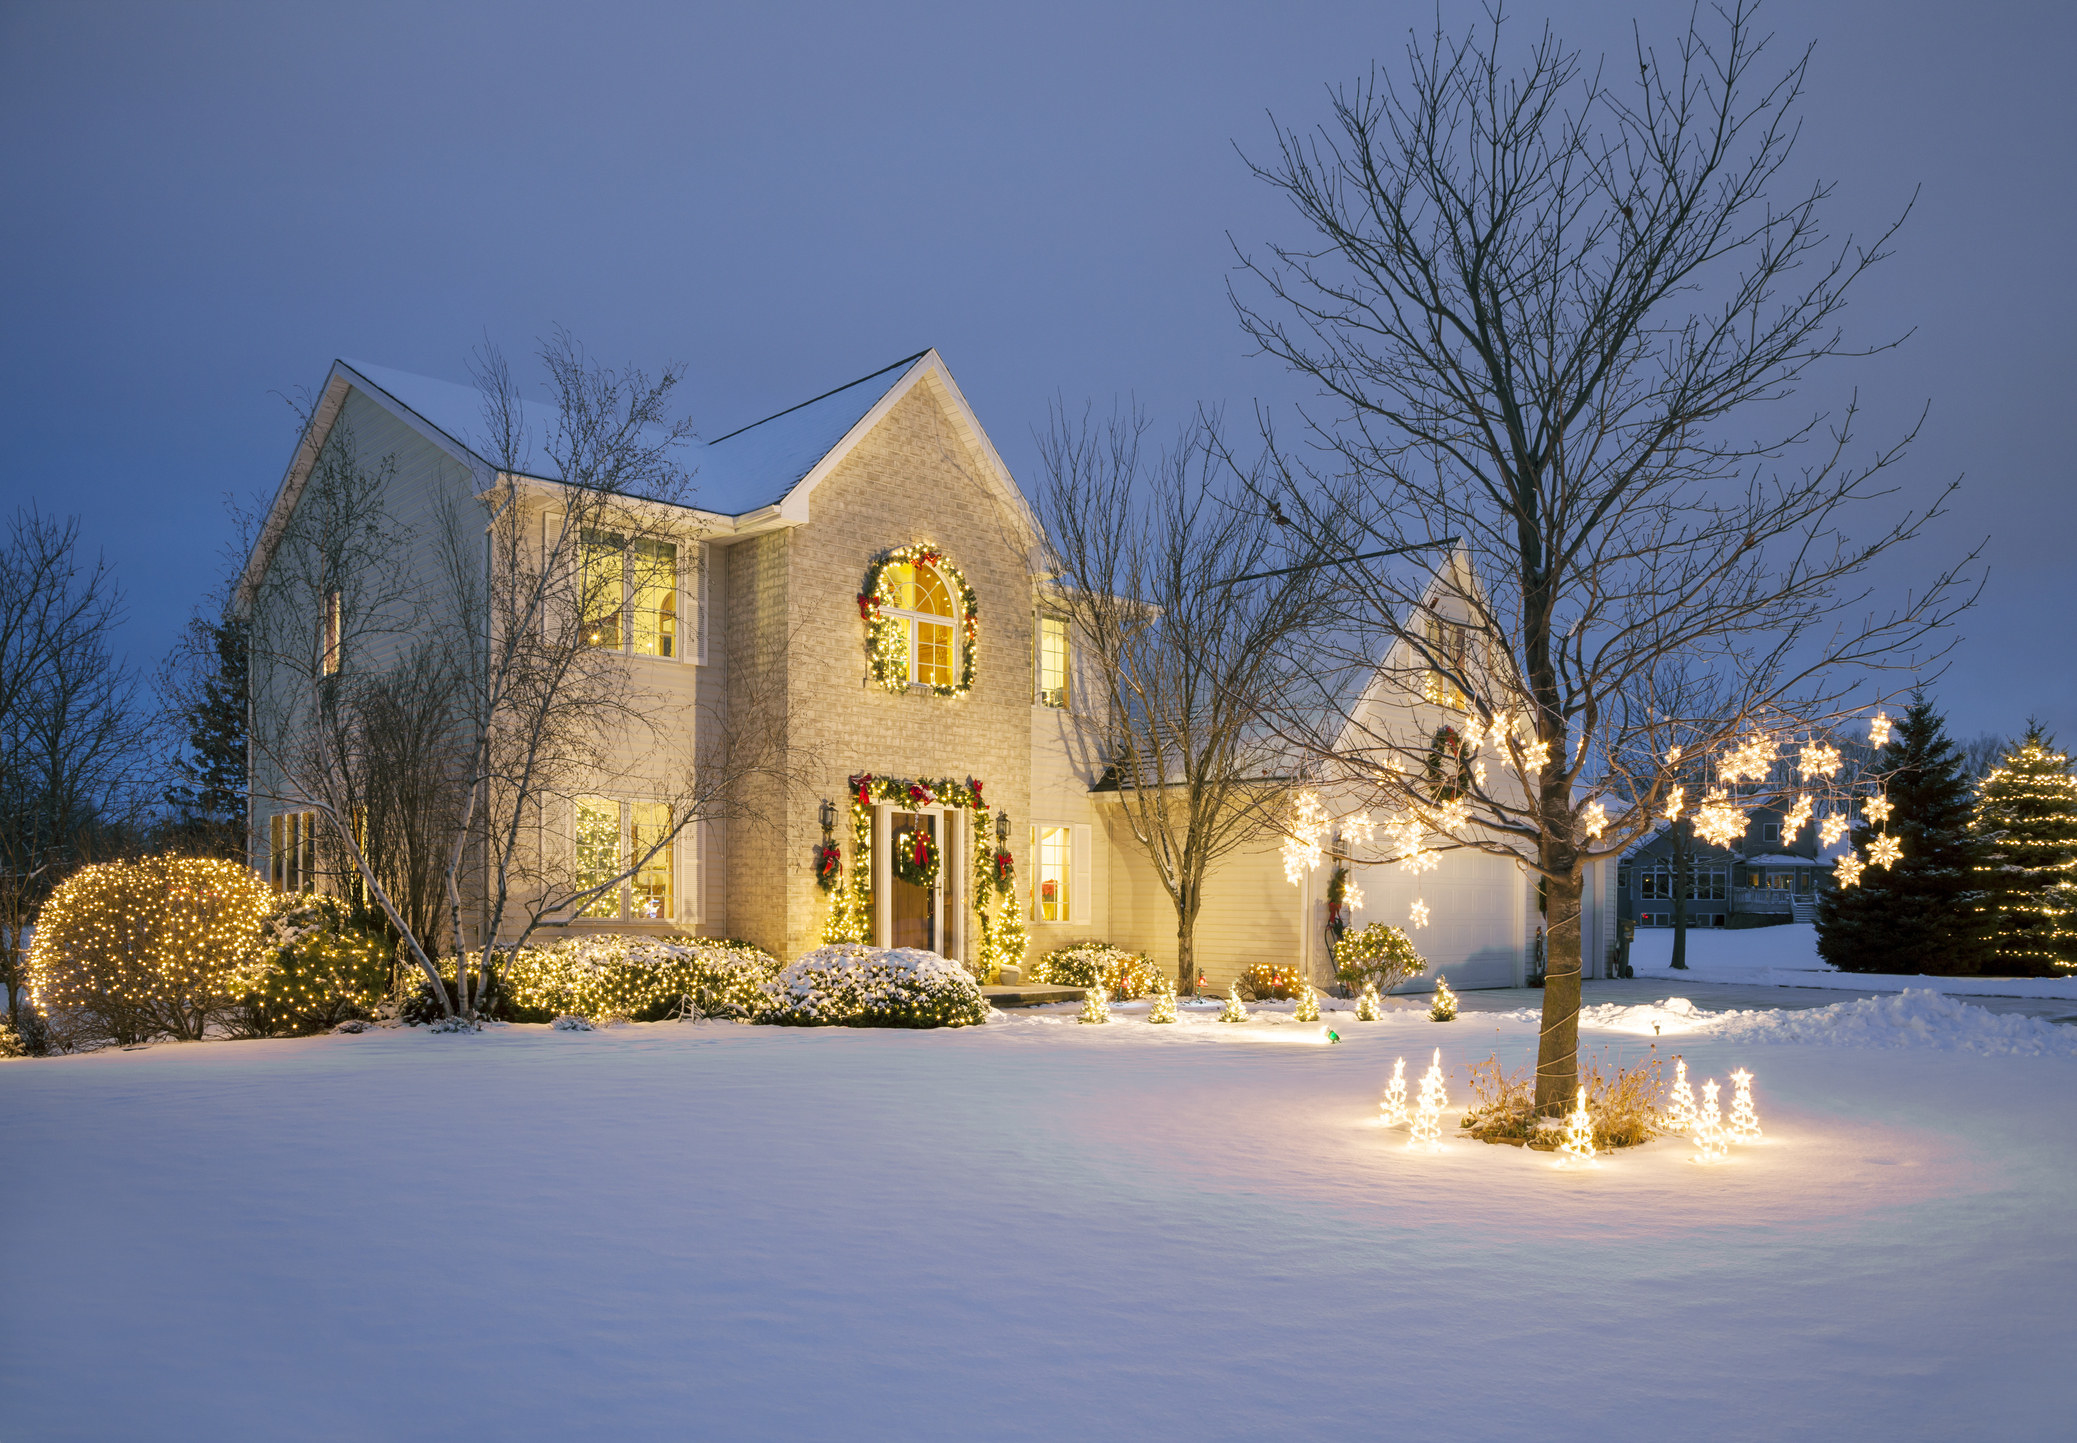 A large house with Christmas lights and surrounded by snow